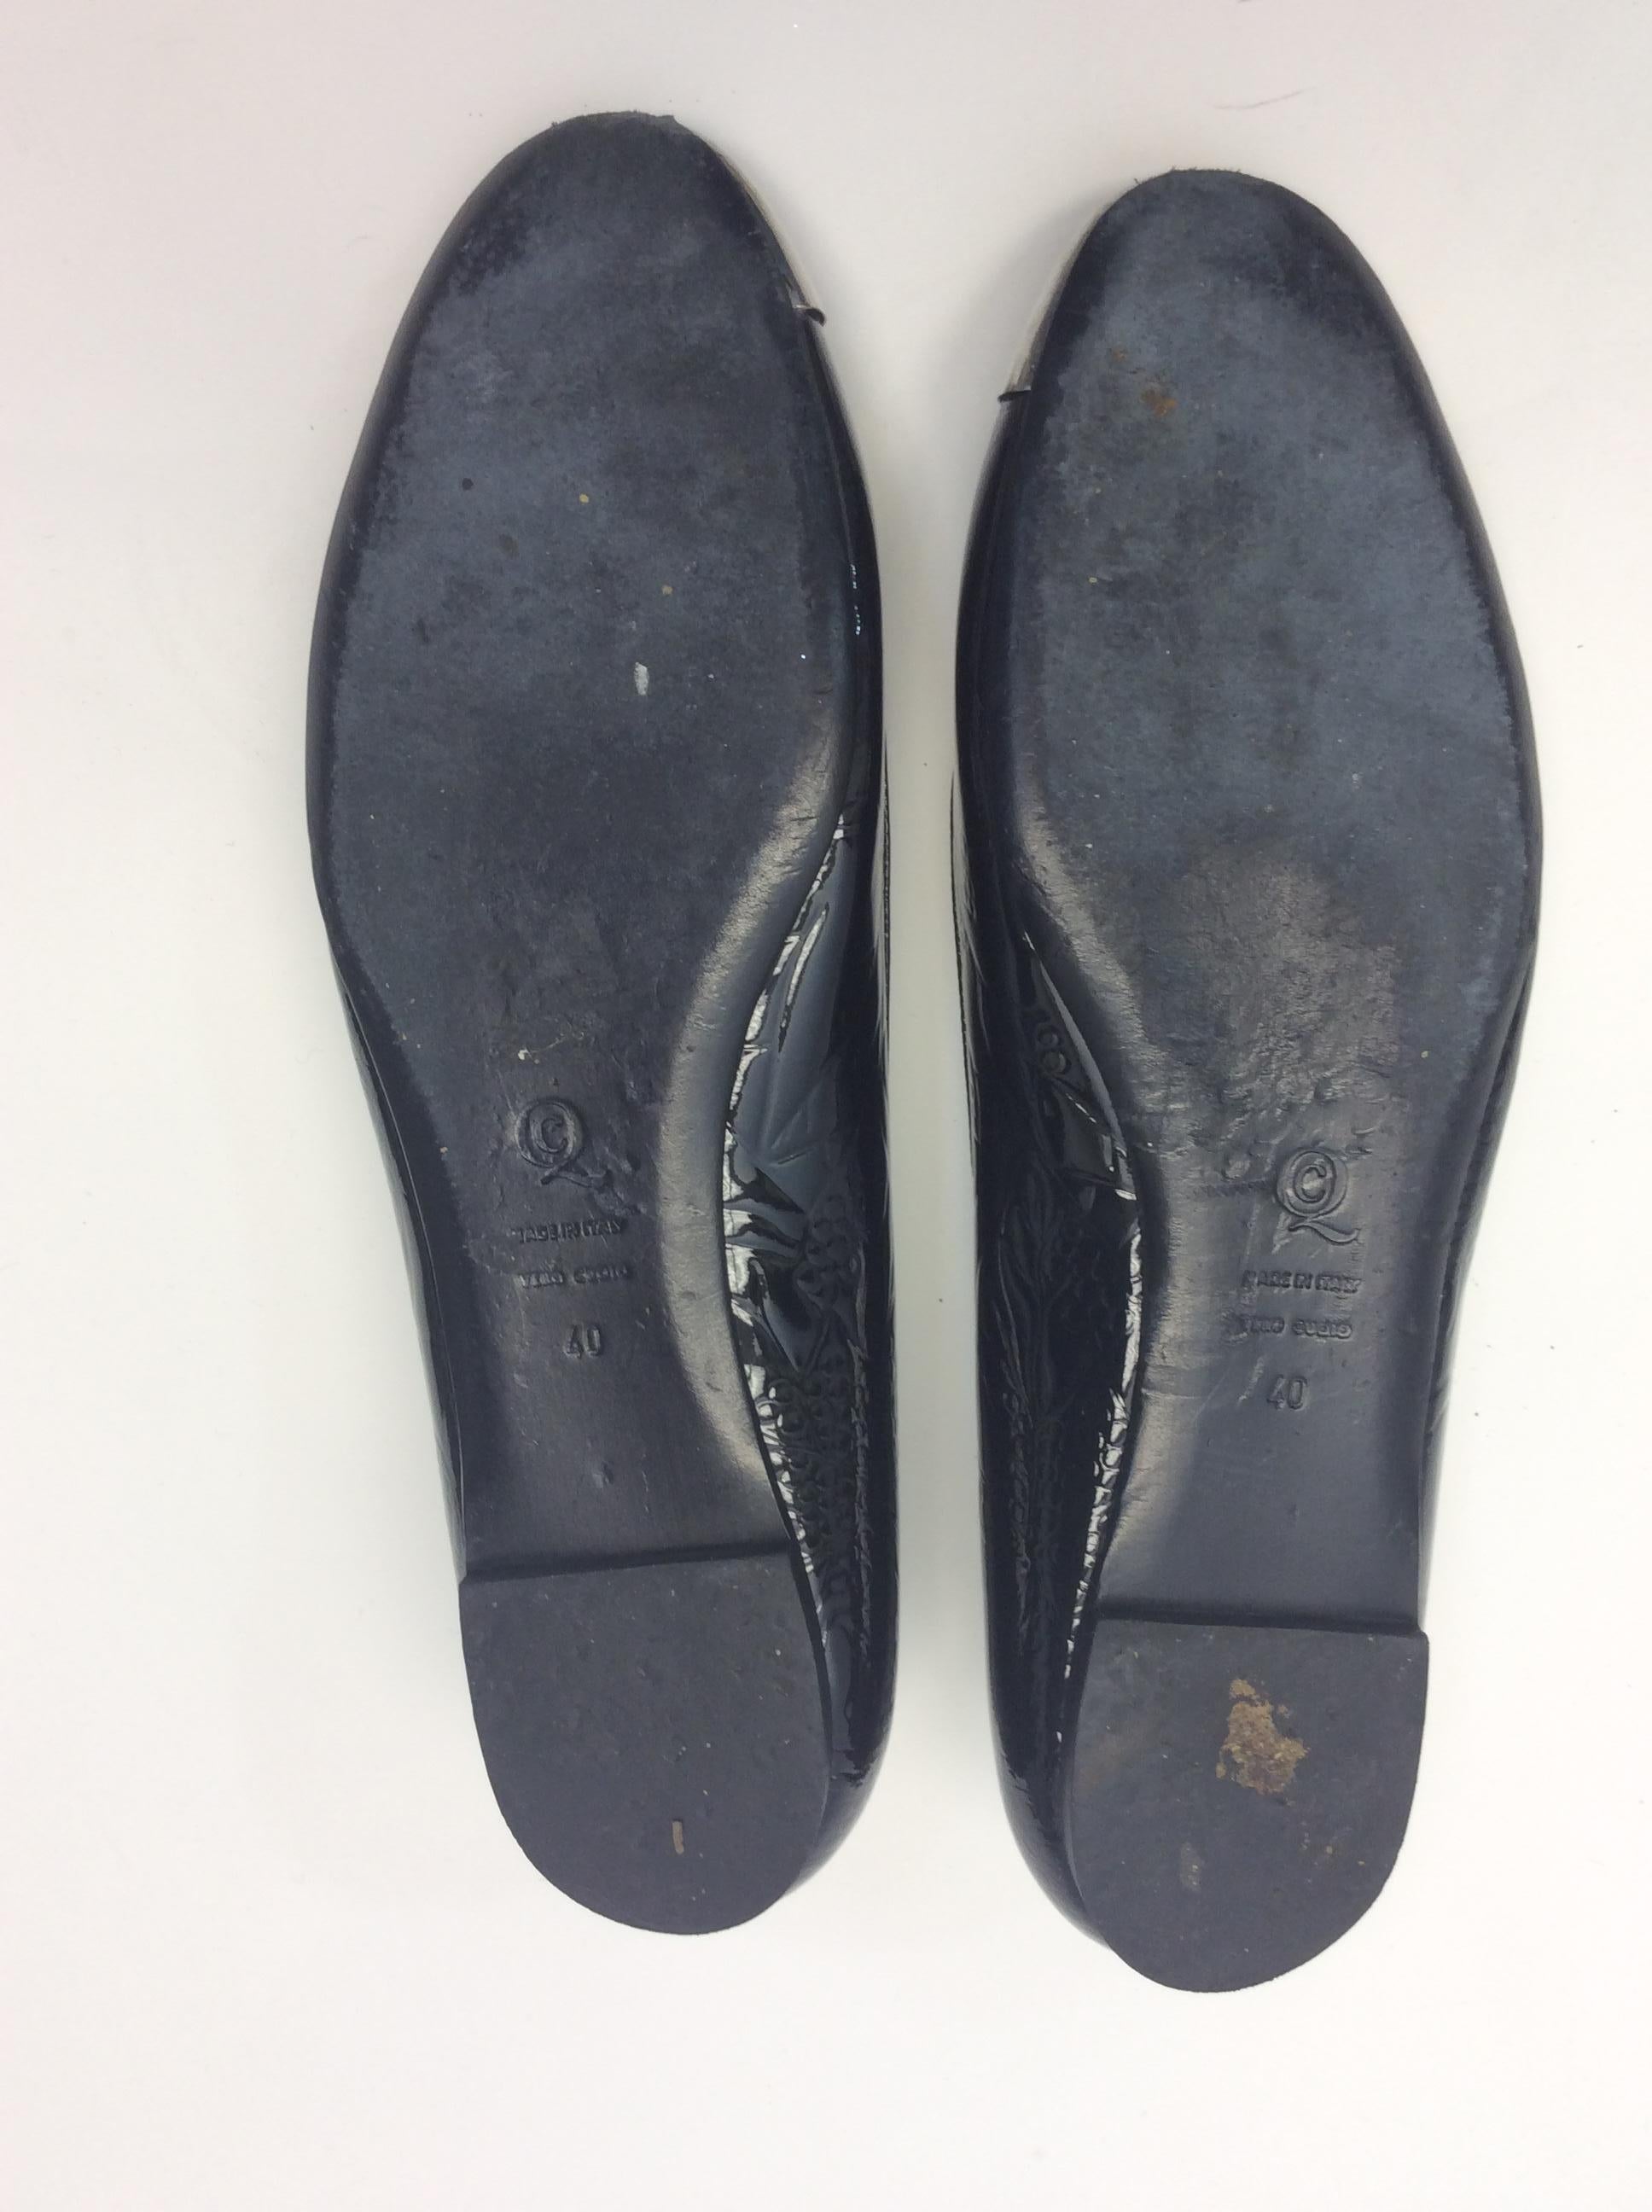 Alexander McQueen Black Patent Leather and Silver Ballet Flats For Sale 4